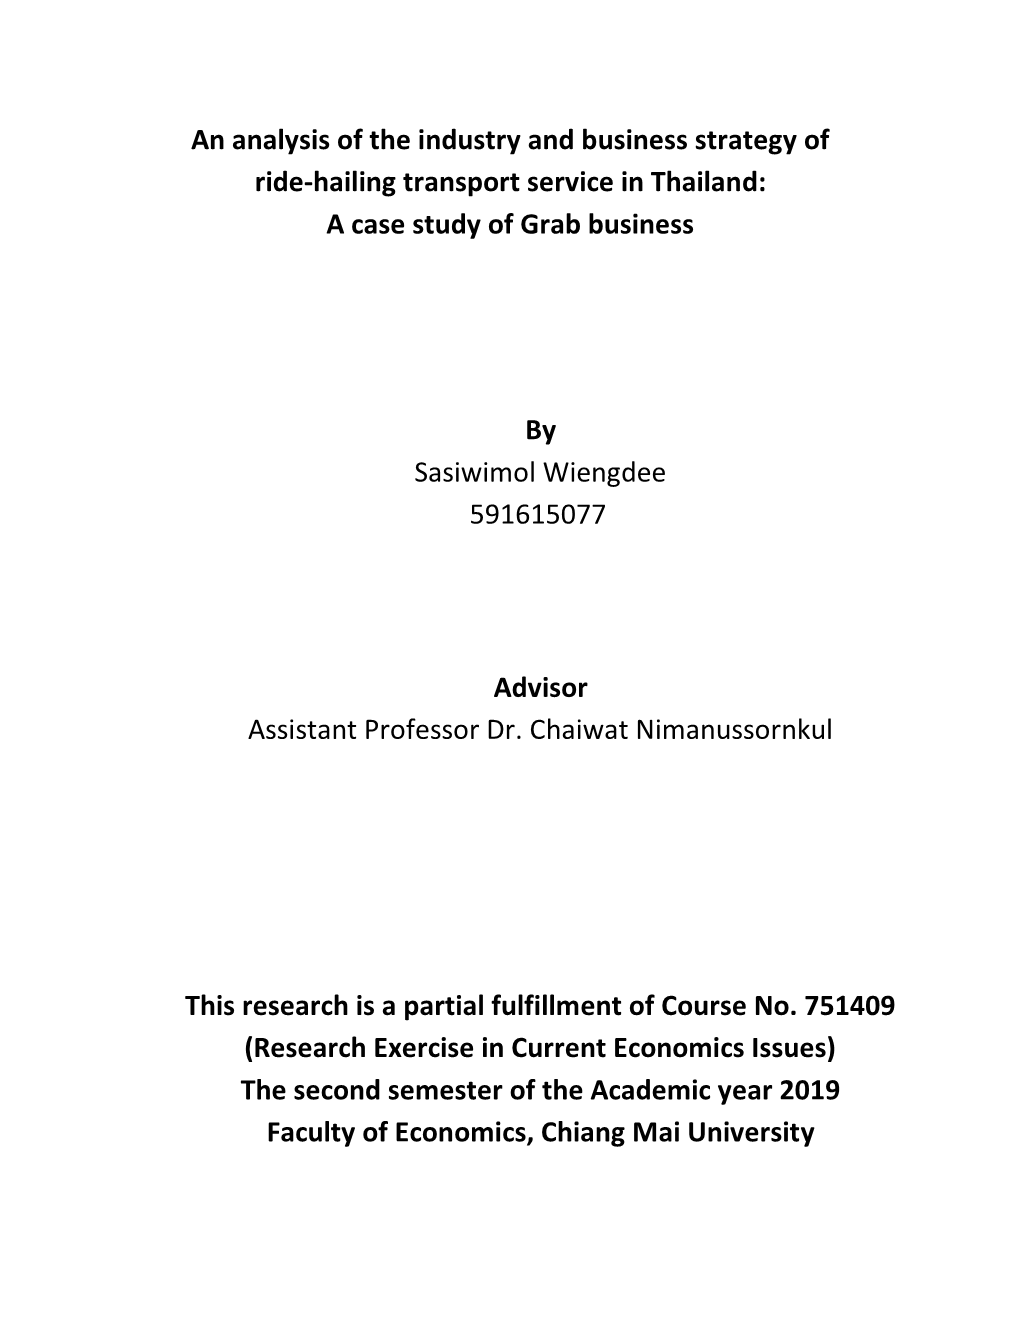 An Analysis of the Industry and Business Strategy of Ride-Hailing Transport Service in Thailand: a Case Study of Grab Business